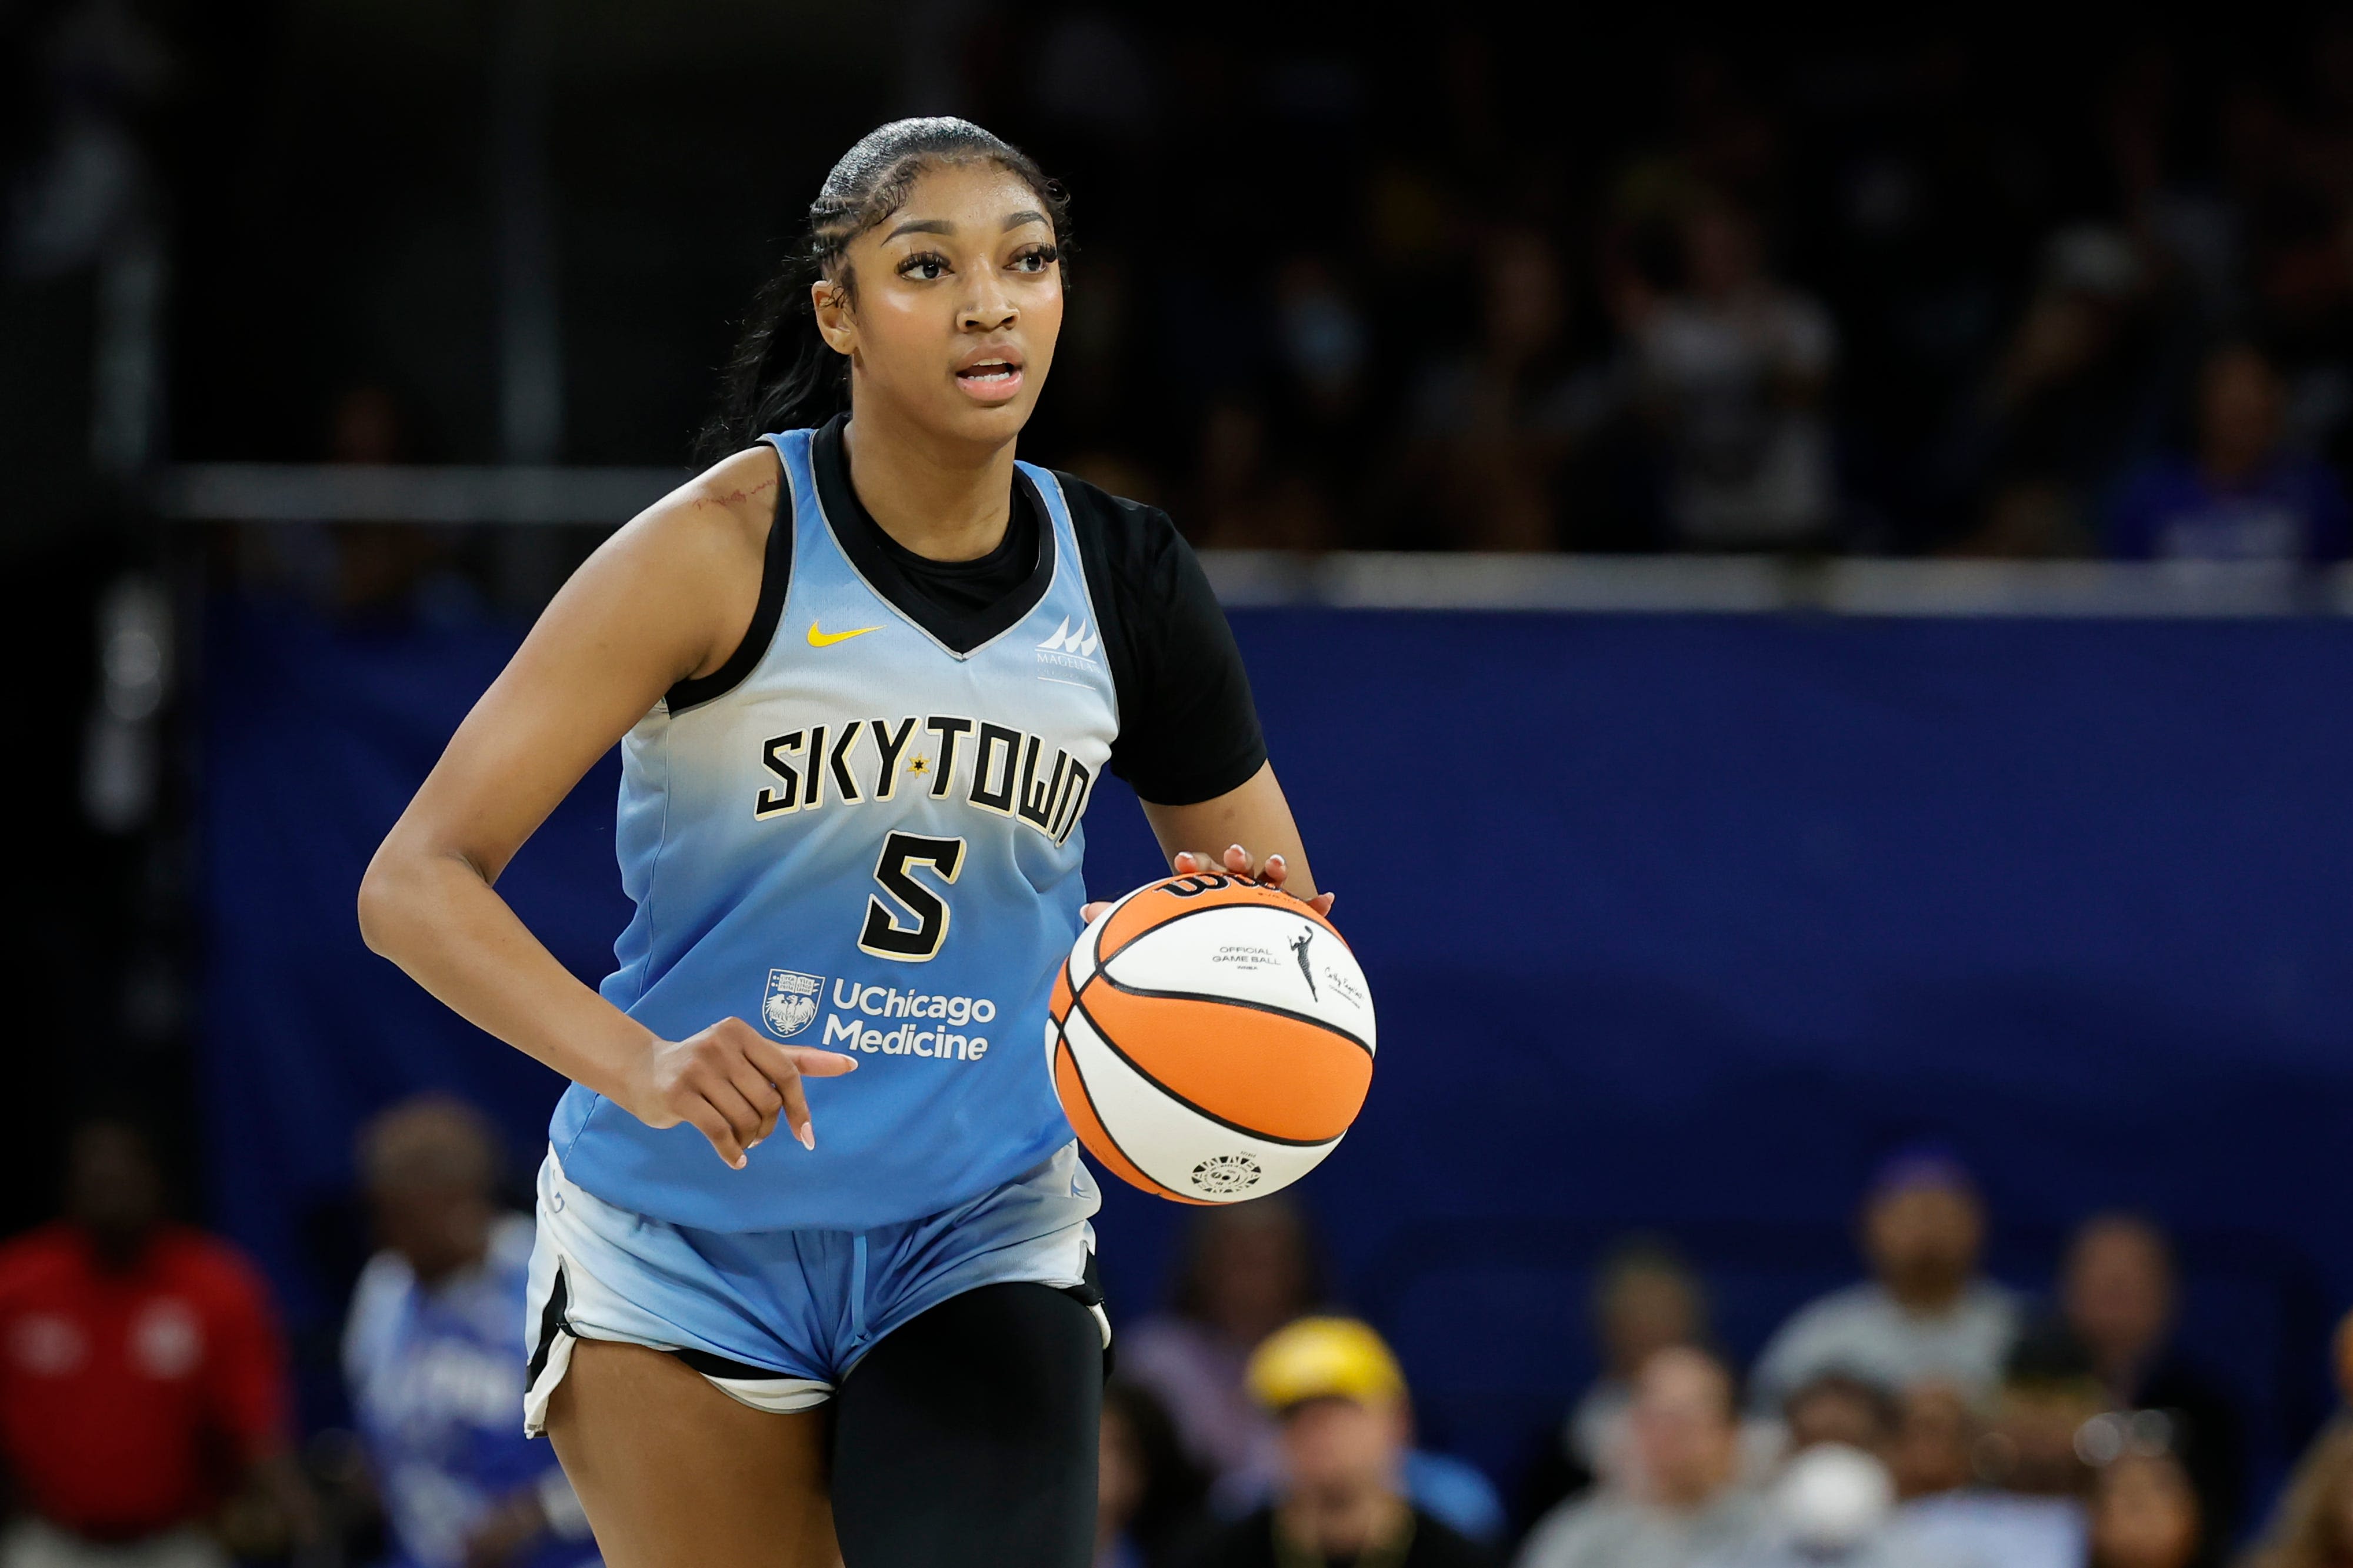 Sky's Angel Reese joins Mercury's Kahleah Copper, WNBA stars in Unrivaled 3-on-3 league